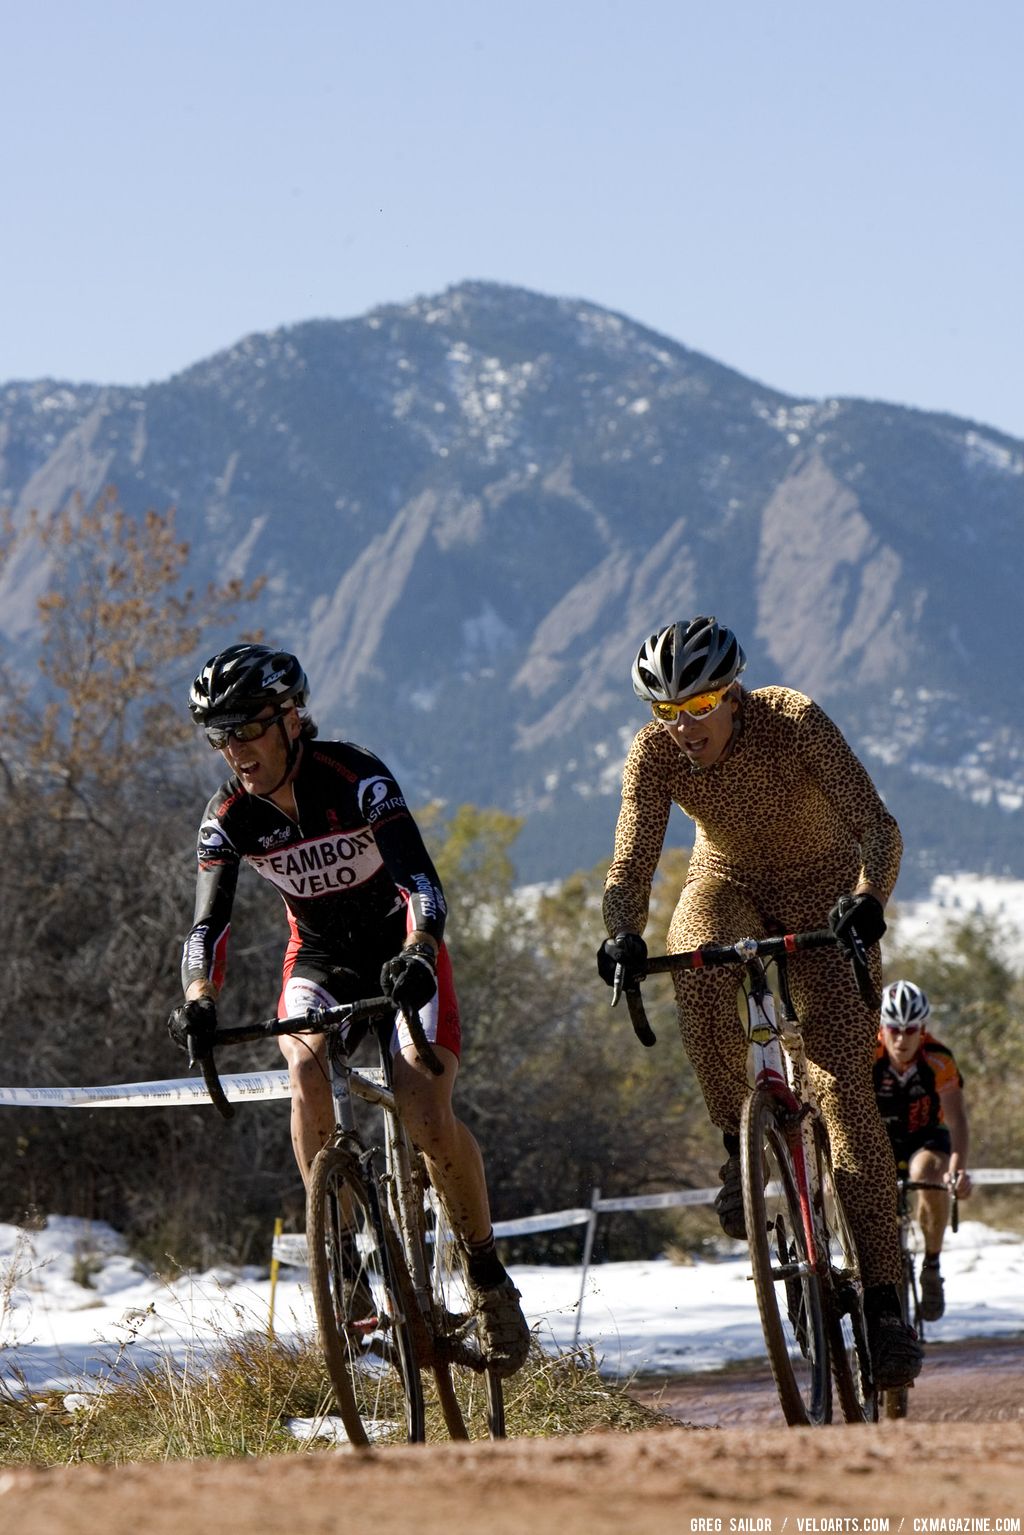 The front range of the Rockies formed the backdrop for riders on the course during the combined race of the Victory Circle Graphix Boulder Cup. © Greg Sailor - VeloArts.com